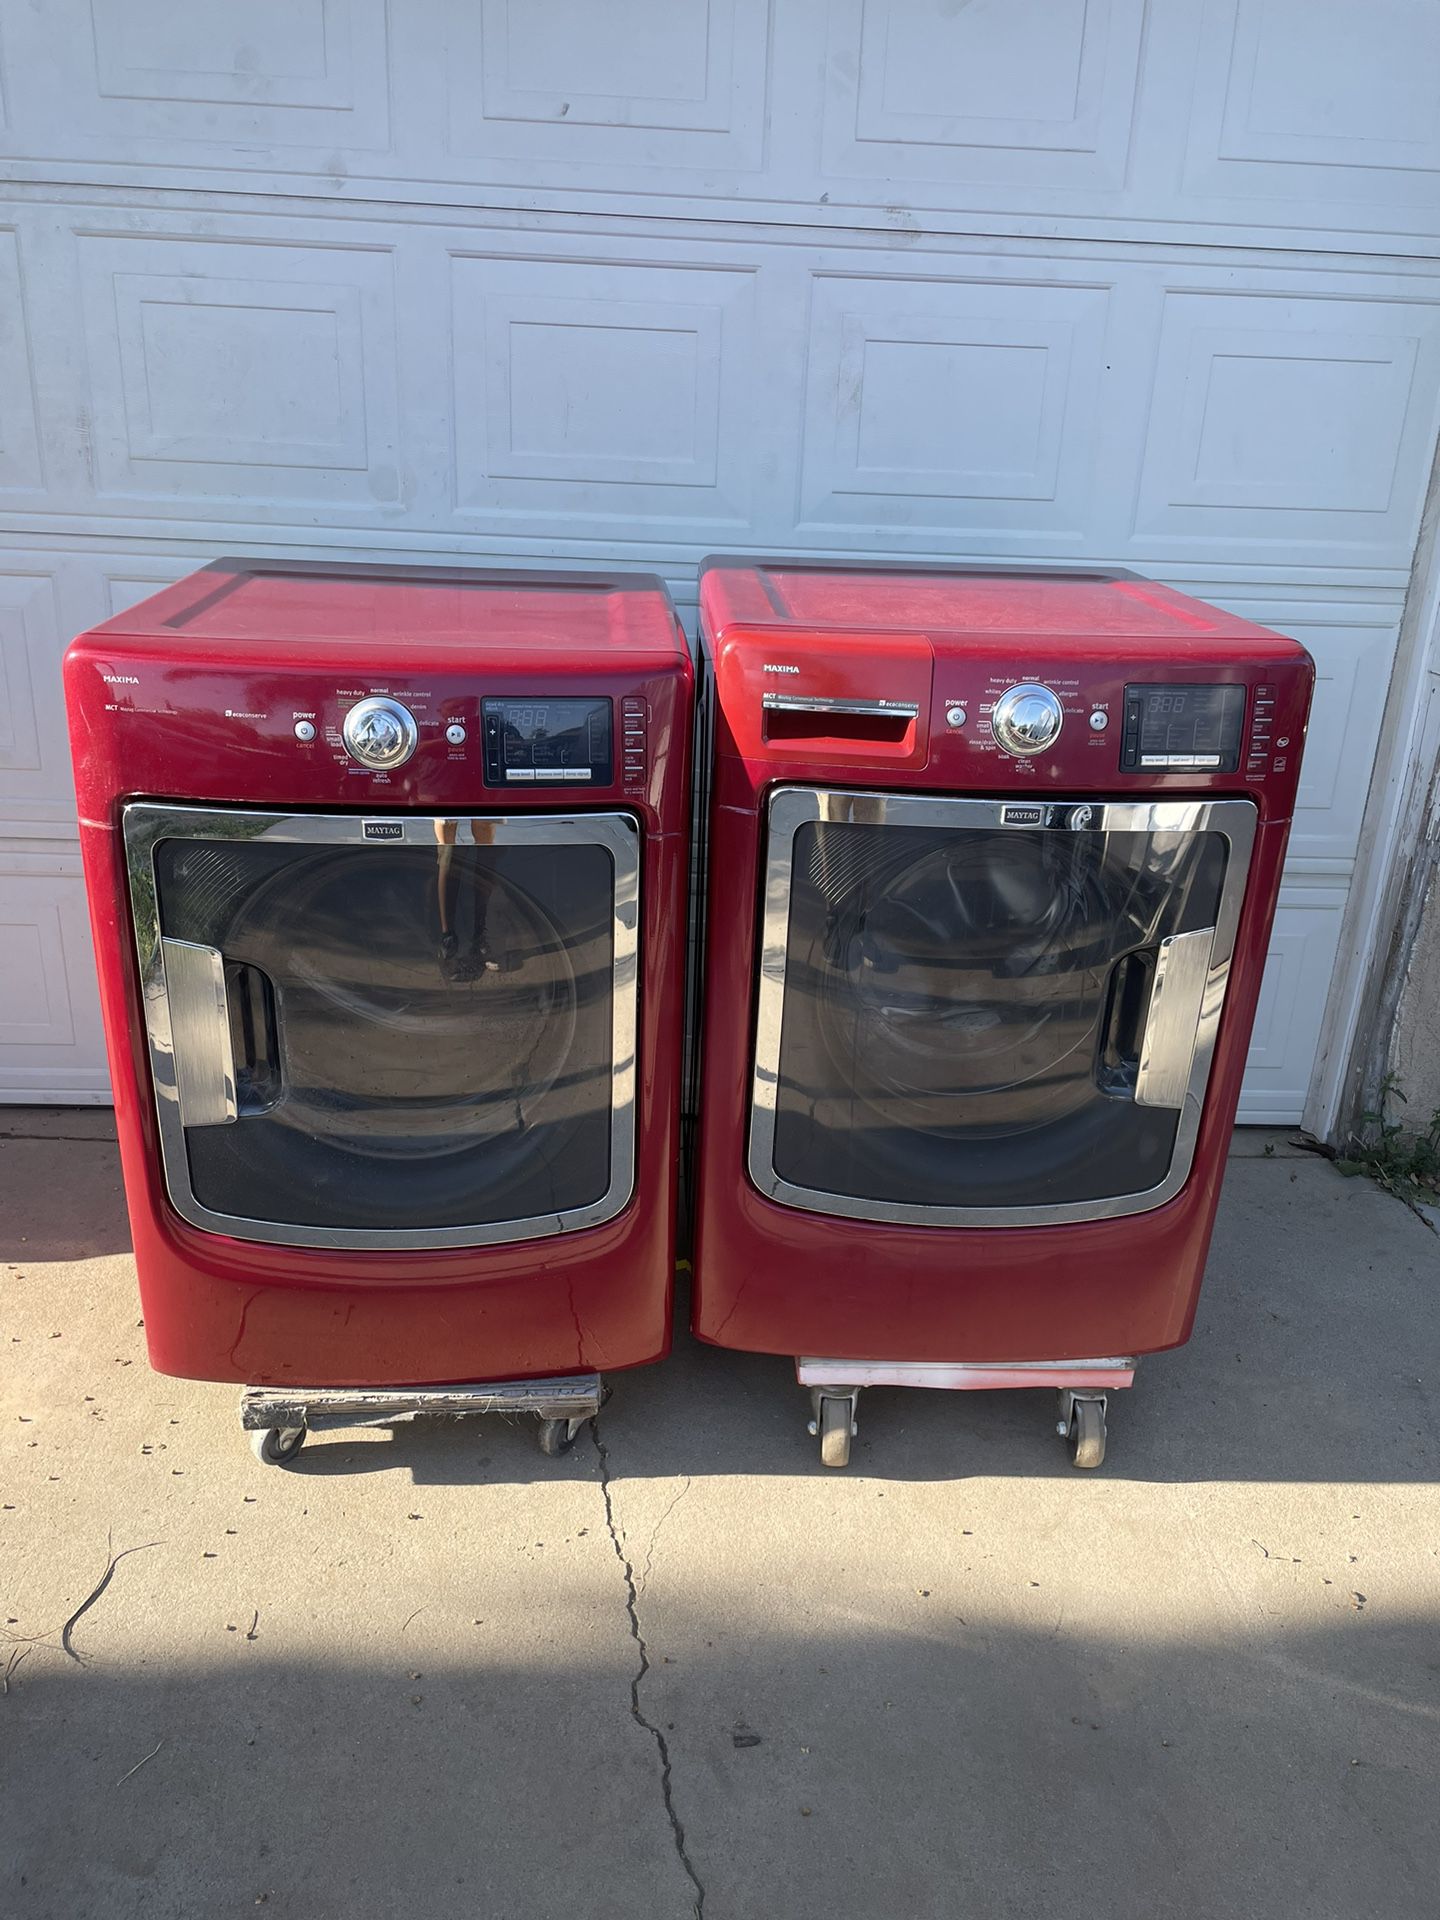 Maytag Maxima Front Load Washer And Electric Dryer Matching Set 